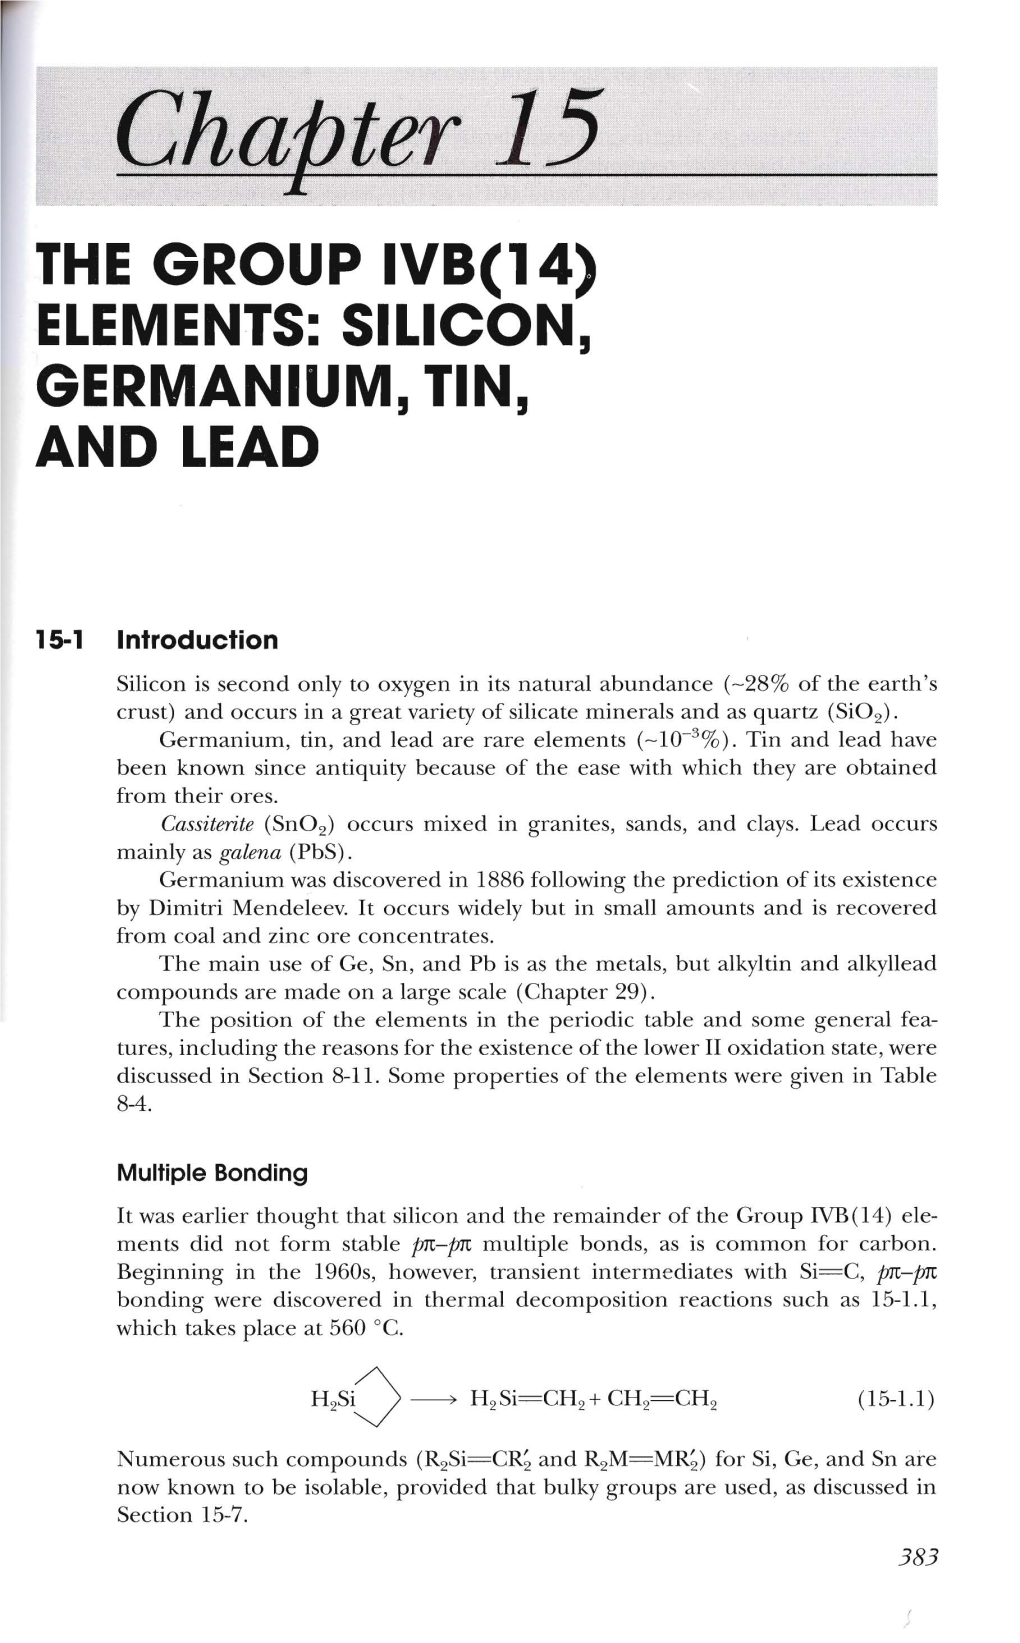 Chapter 15 the GROUP IVB(14) ELEMENTS: SILICON, GERMANIUM, TIN, and LEAD